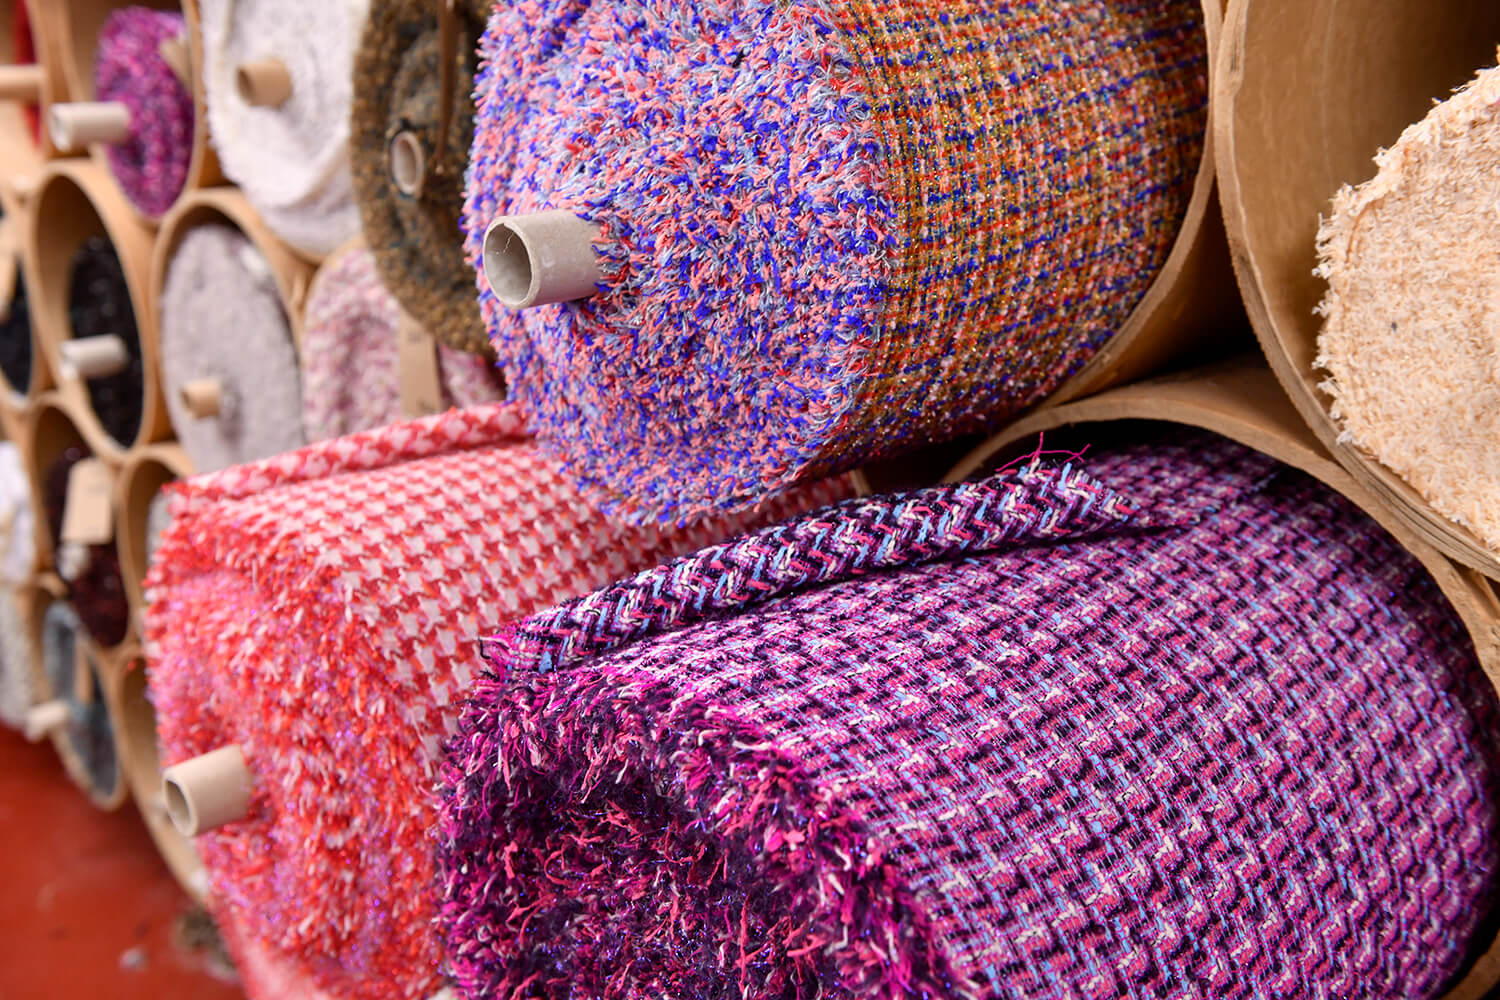 Selection of Linton Tweed materials that are made in Cumbria